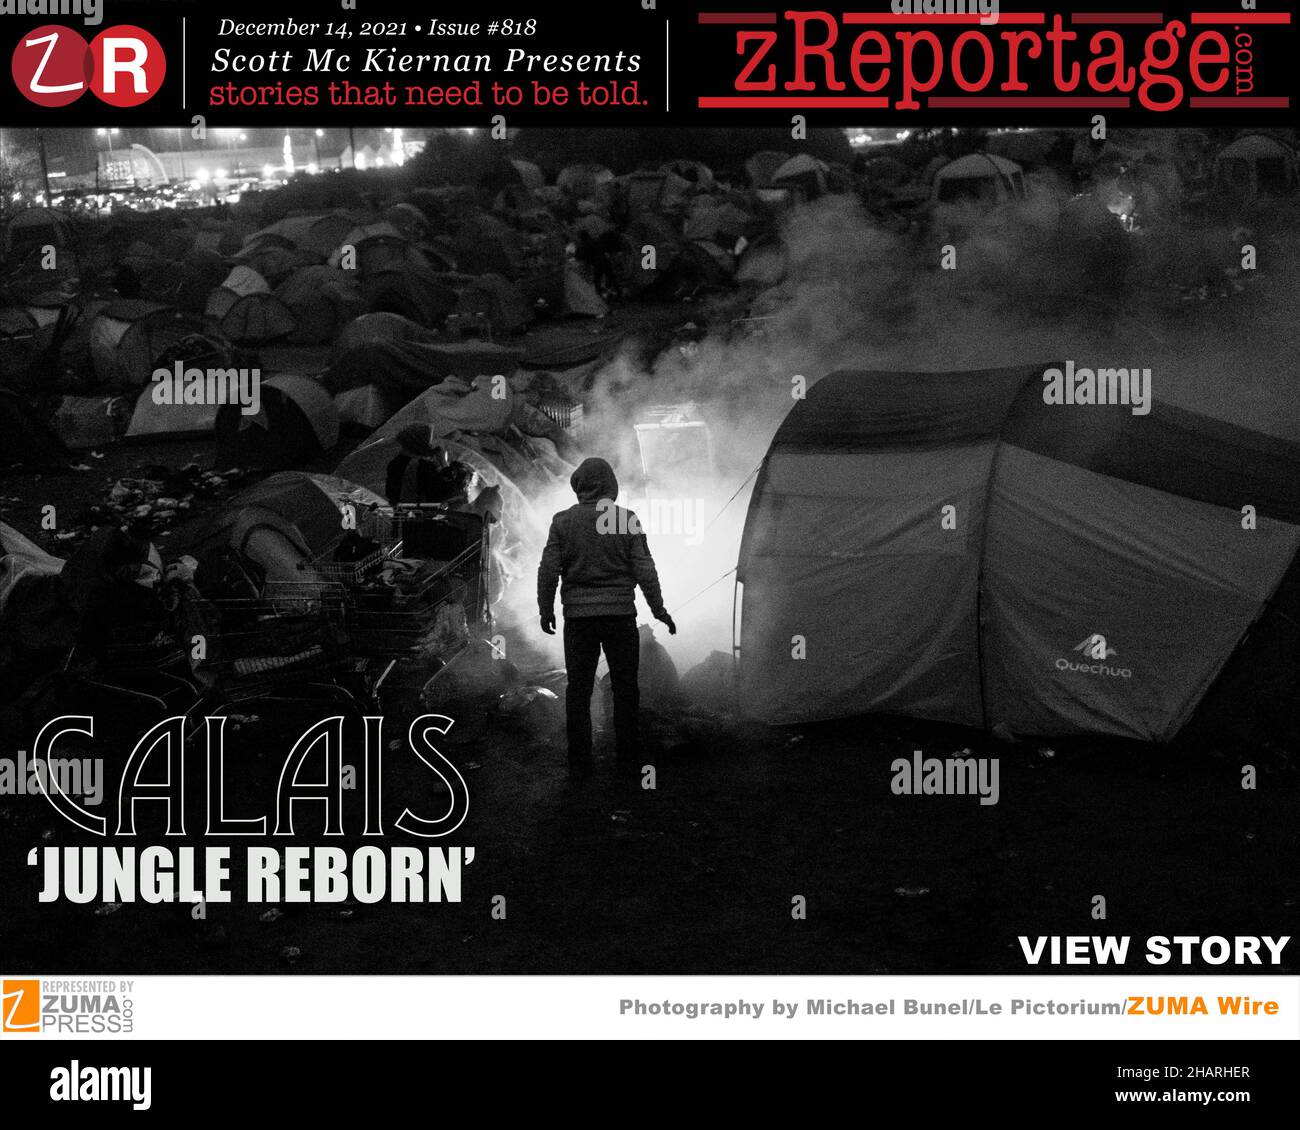 zReportage.com Story of the Week #818: TUESDAY December 14, 2021: 'CALAIS JUNGLE REBORN' by Le Pictorium photographer Michael Bunel who has spent 10 years covering the migrant crisis in Europe: The huge refugee camp in Calais known as the 'Jungle' became notorious in 2015, as 1 million people fled war and danger to come to Europe. Yet 5 years after it was demolished up to 2,000 migrants are still waiting in makeshift camps, at the centre of a political storm. Migrant boat crossings from France to the United Kingdom's English coast are at record levels as both countries struggle to handle the f Stock Photo